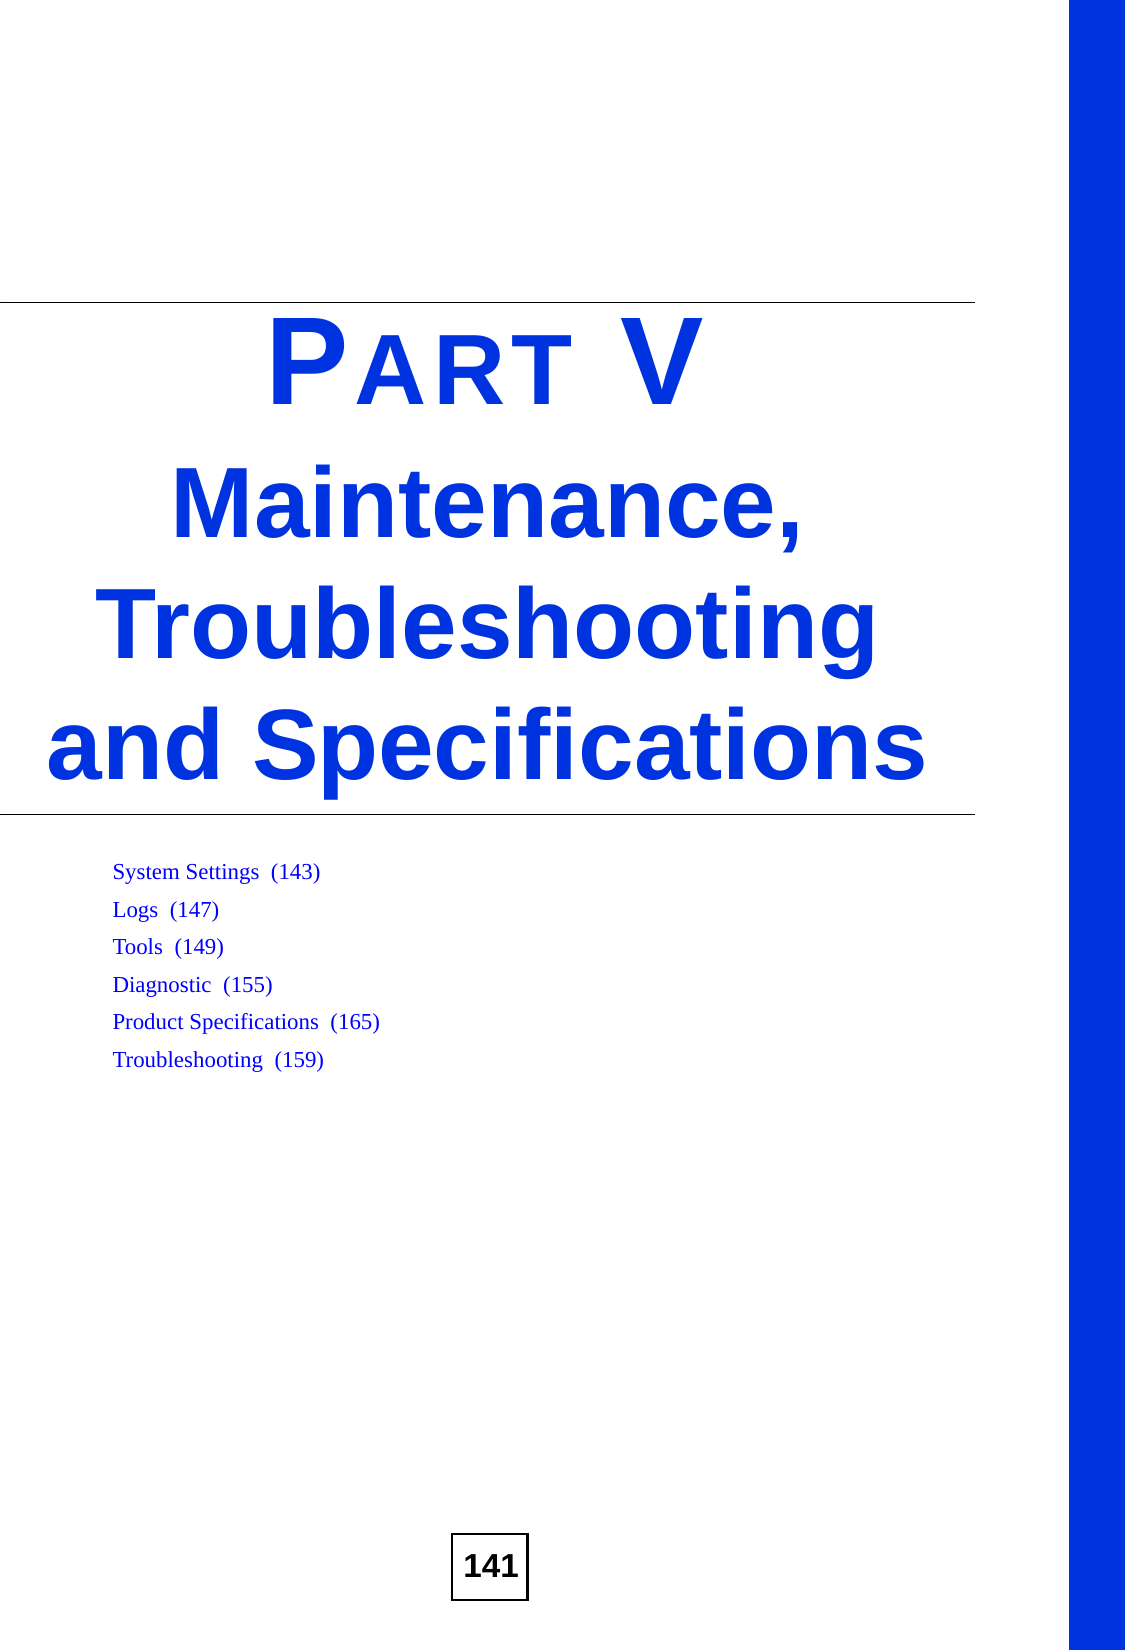 141PART VMaintenance, Troubleshooting and SpecificationsSystem Settings  (143)Logs  (147)Tools  (149)Diagnostic  (155)Product Specifications  (165)Troubleshooting  (159)